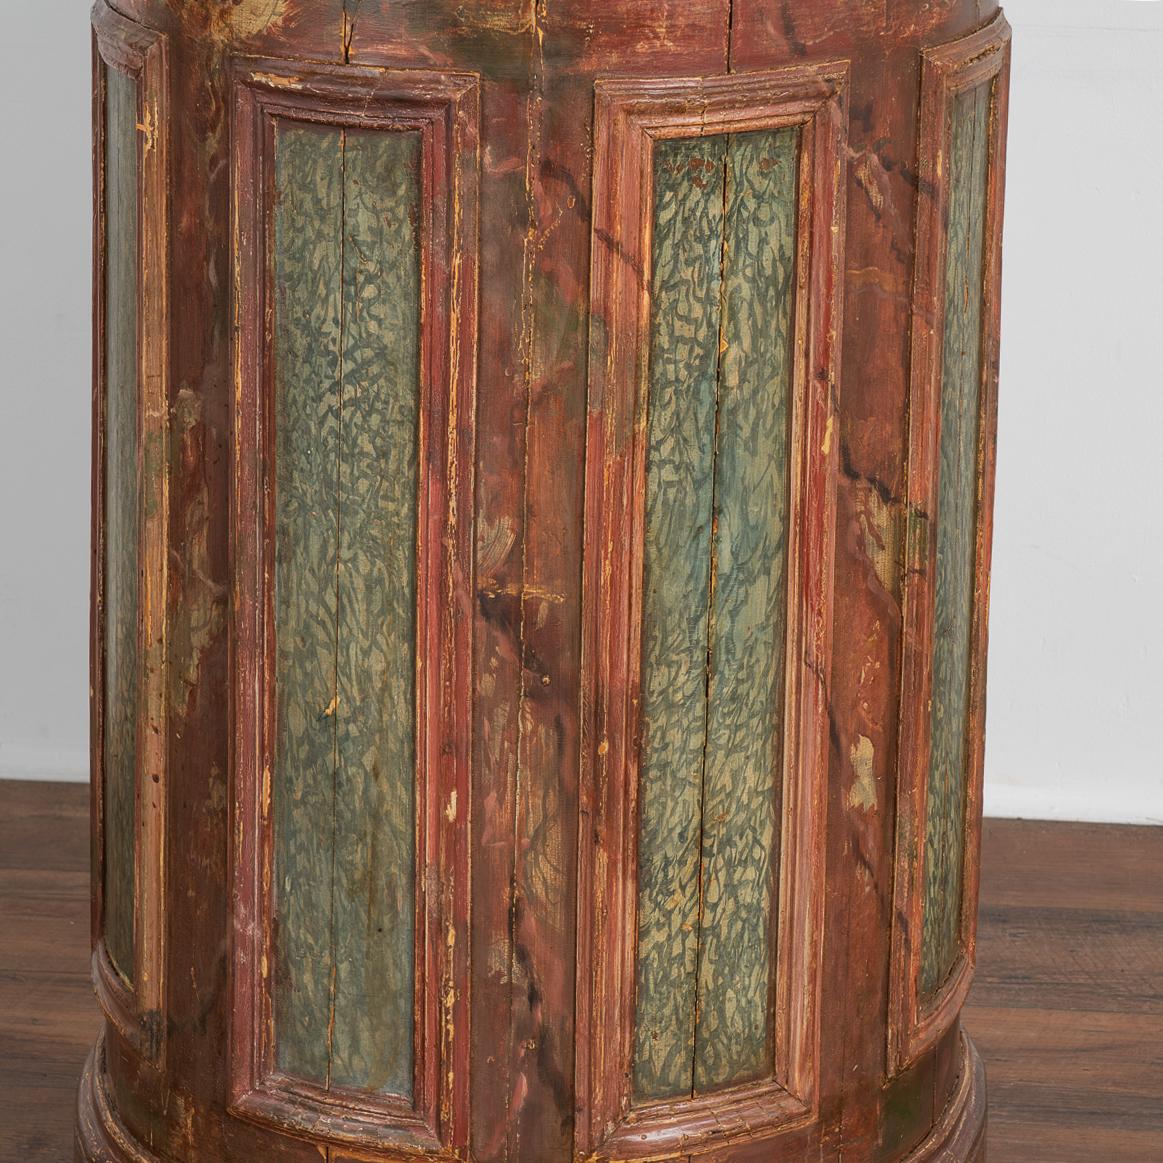 Antique Red Painted Wood Display Pedestal from Sweden, circa 1840-1860 For Sale 2